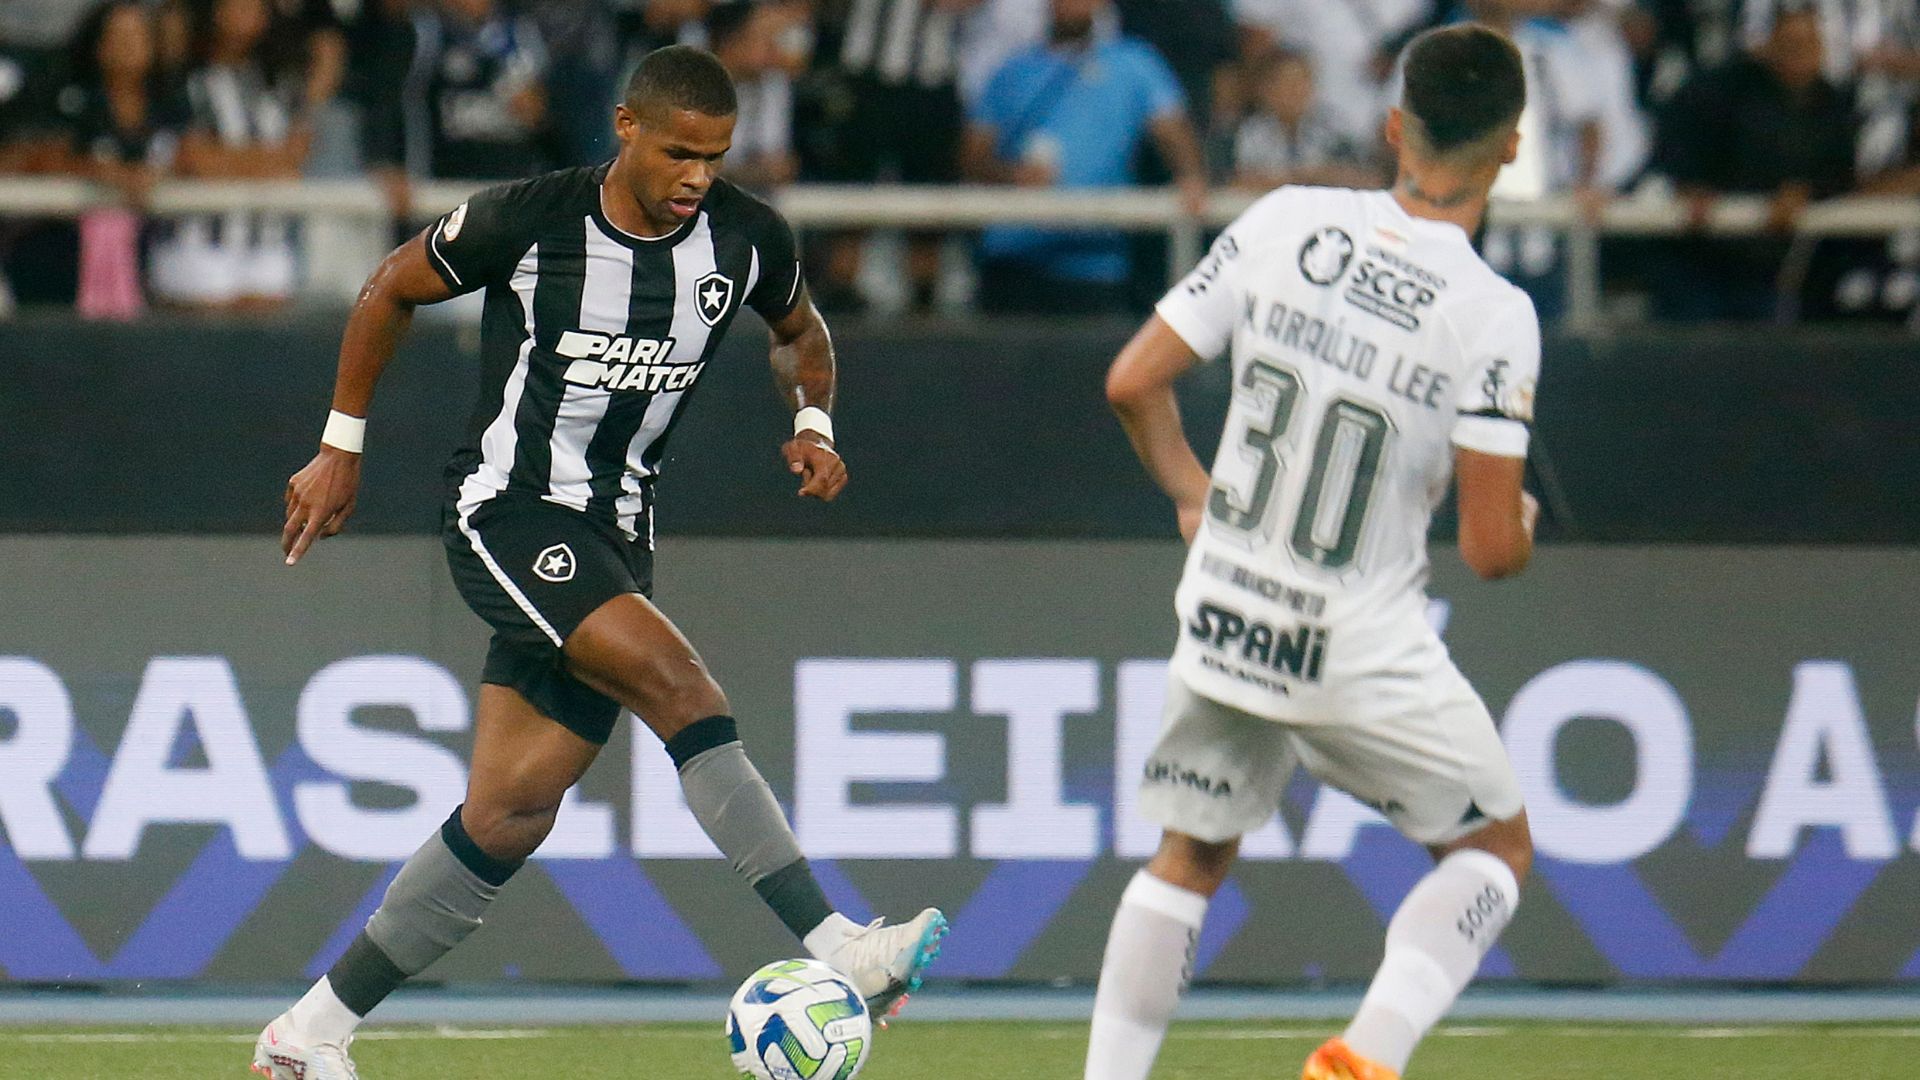 The Botafogo team dominated Corinthians for most of the match (Credit: Vitor Silva / Botafogo)